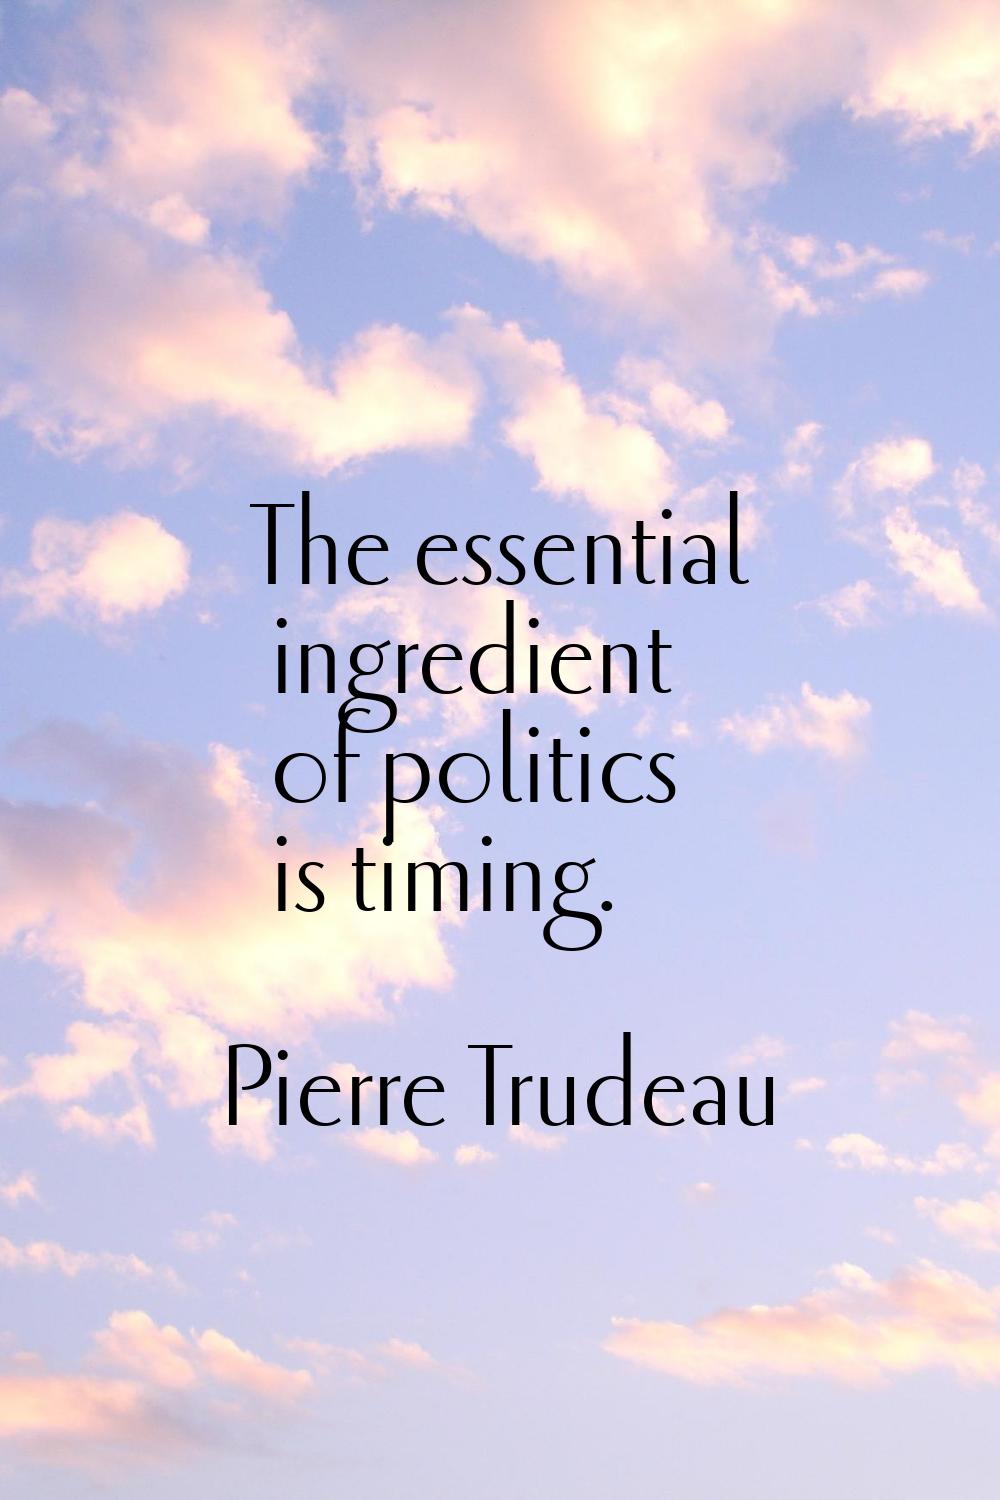 The essential ingredient of politics is timing.